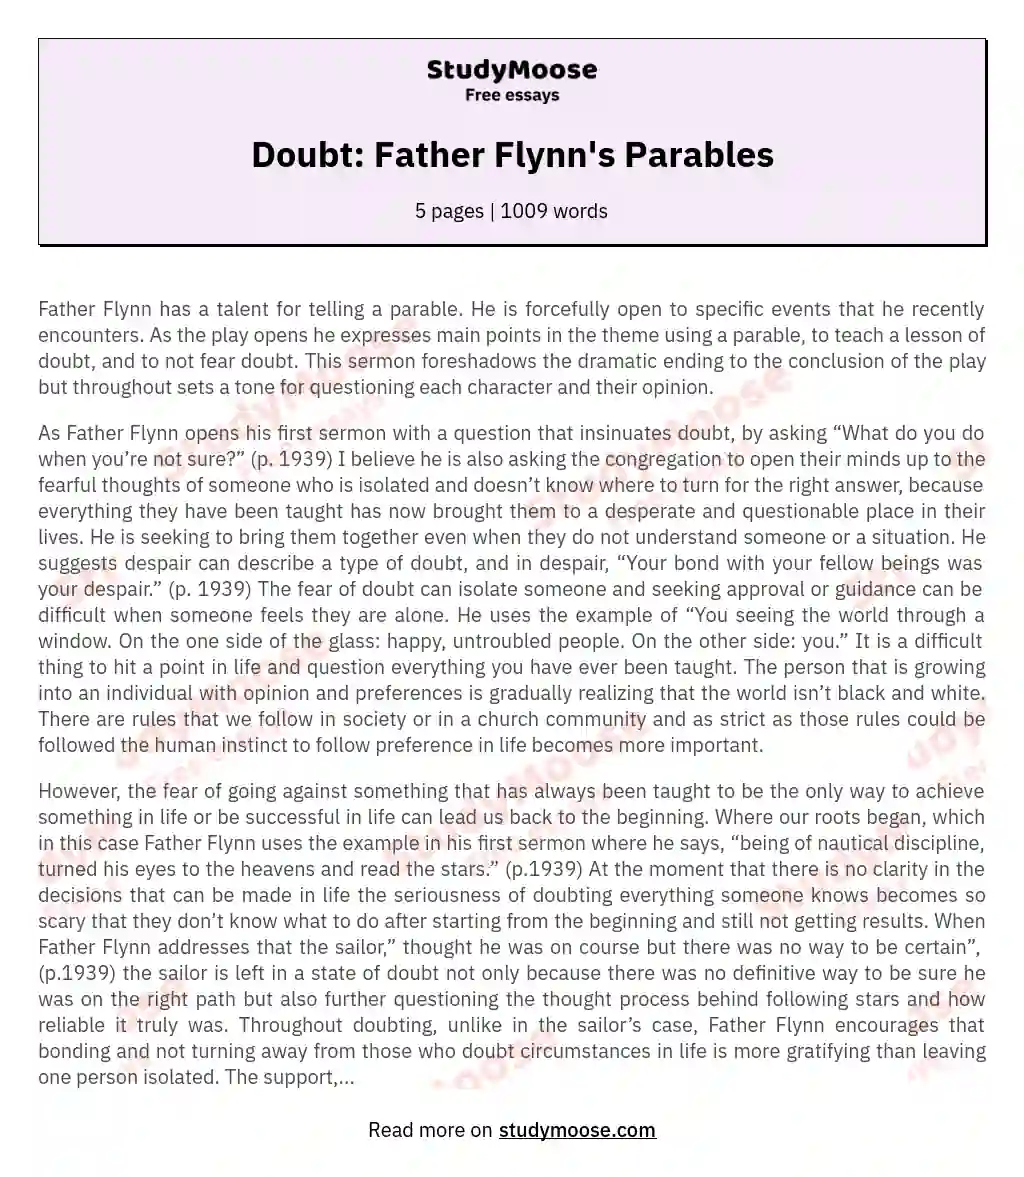 Doubt: Father Flynn's Parables essay